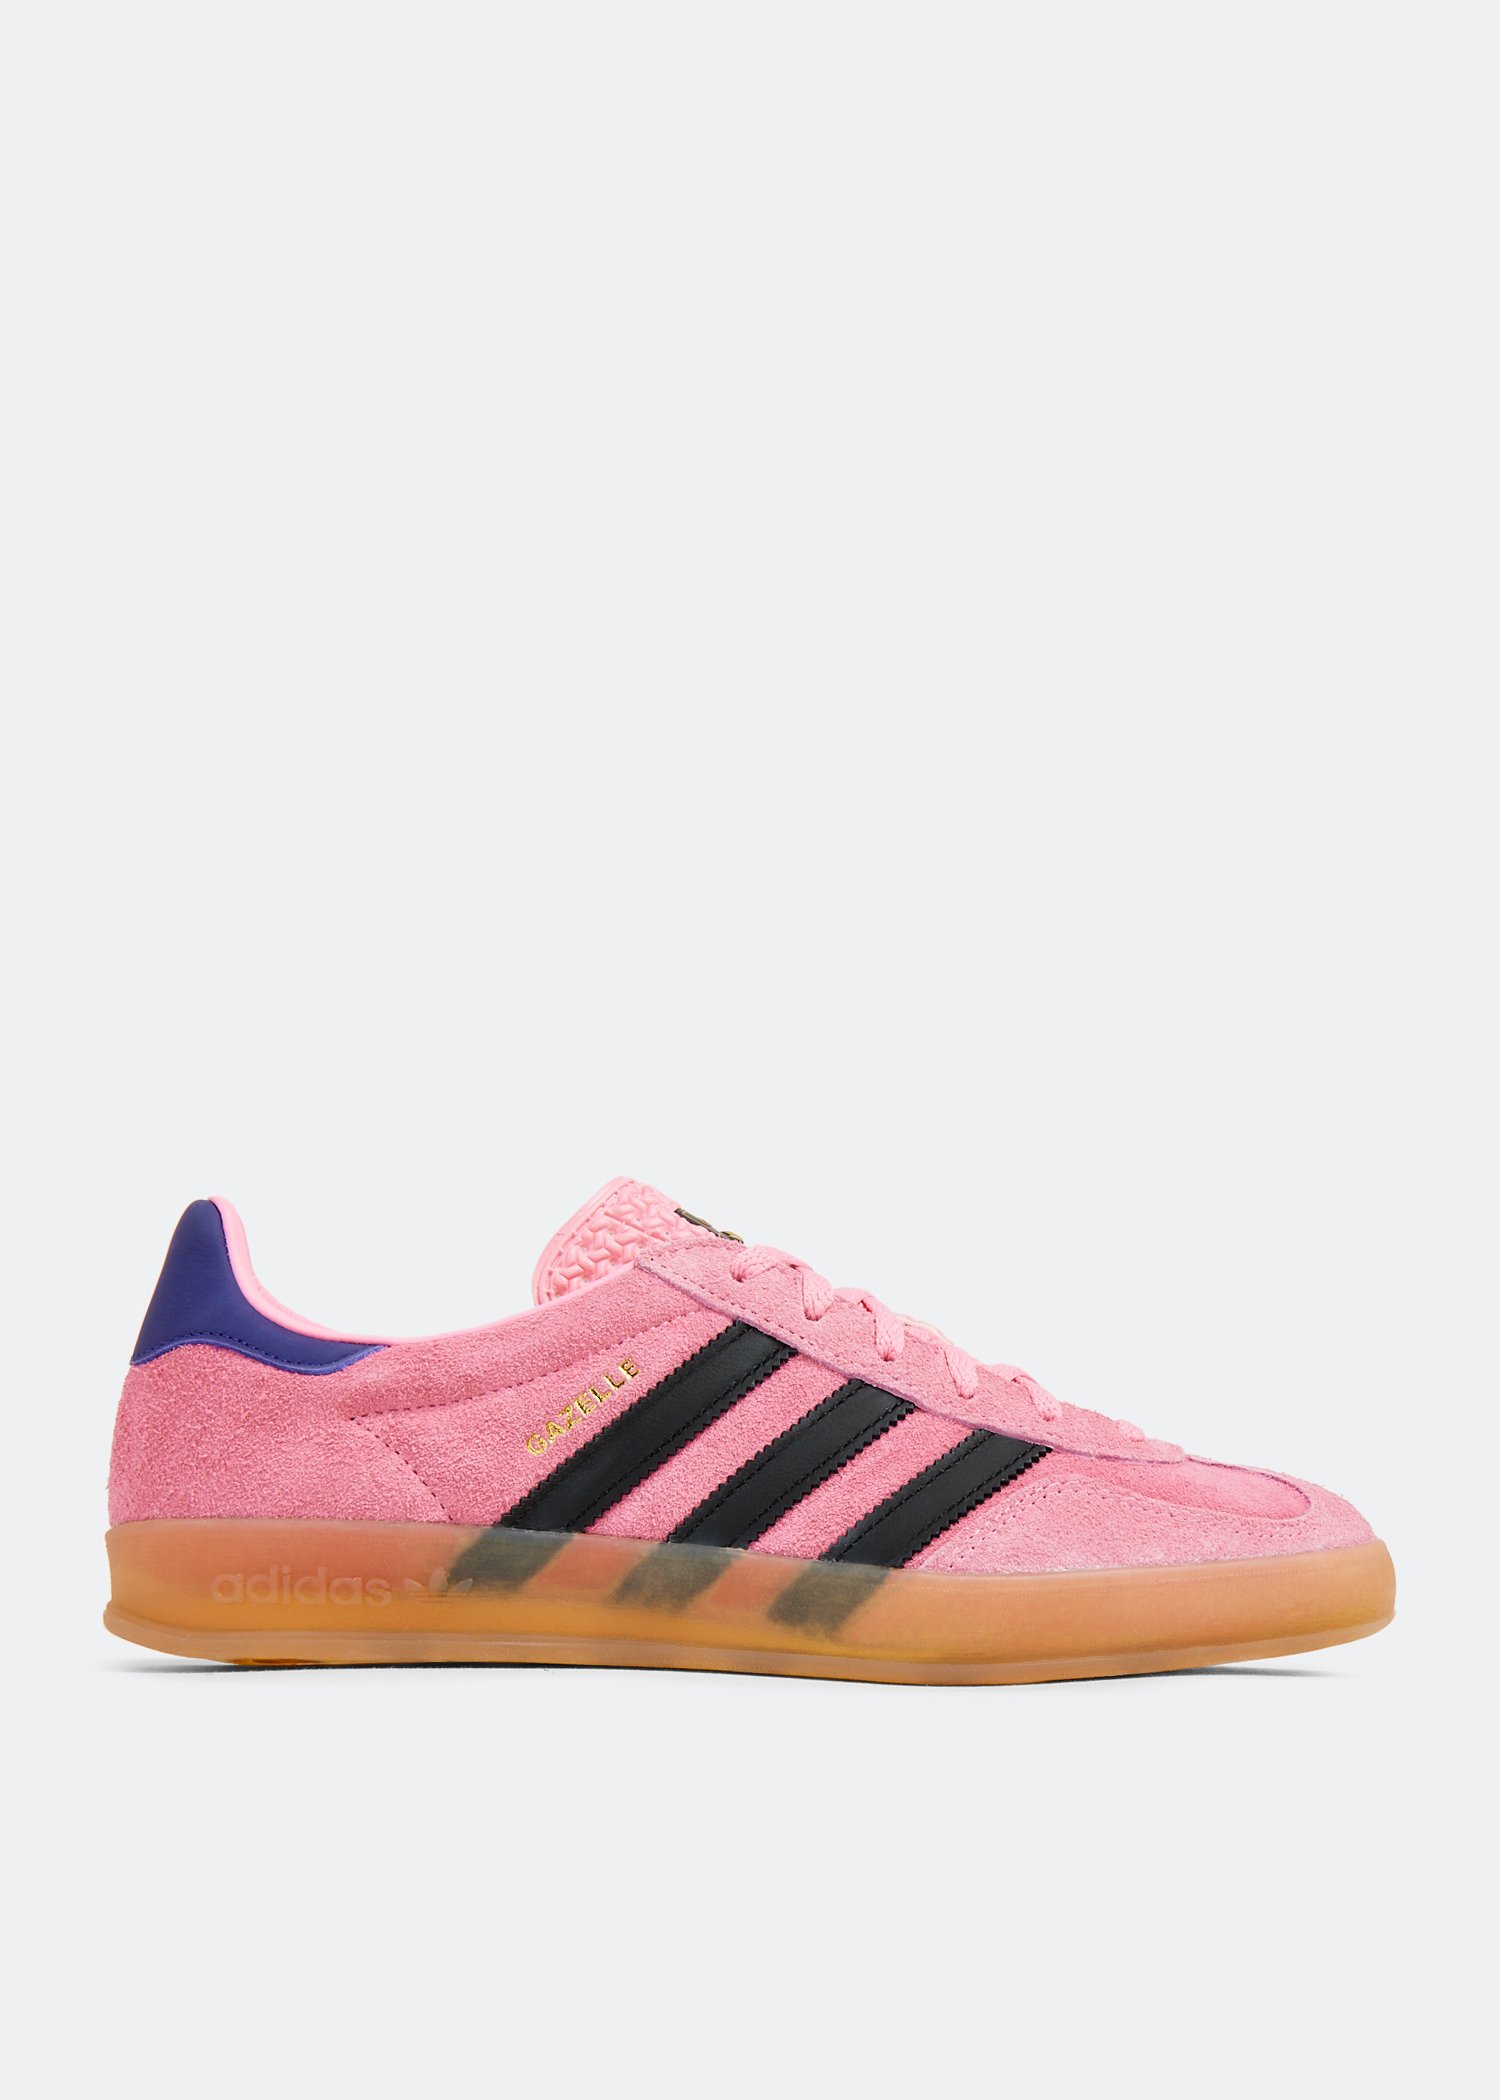 Adidas Gazelle Indoor sneakers for Women - Pink in Qatar | Level Shoes